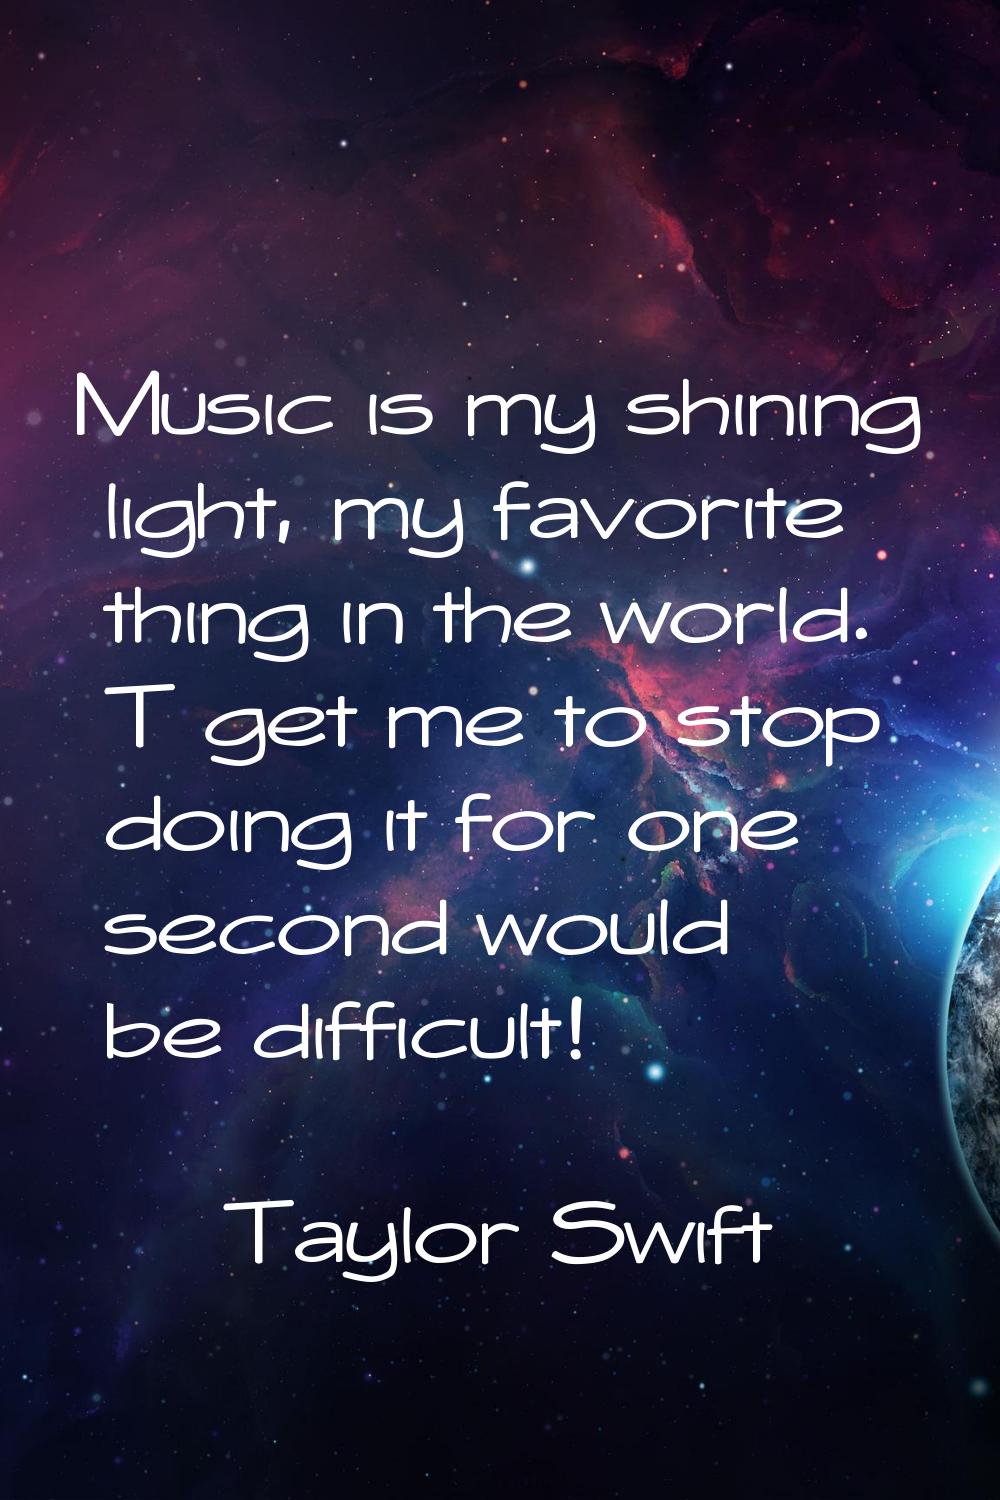 Music is my shining light, my favorite thing in the world. T get me to stop doing it for one second